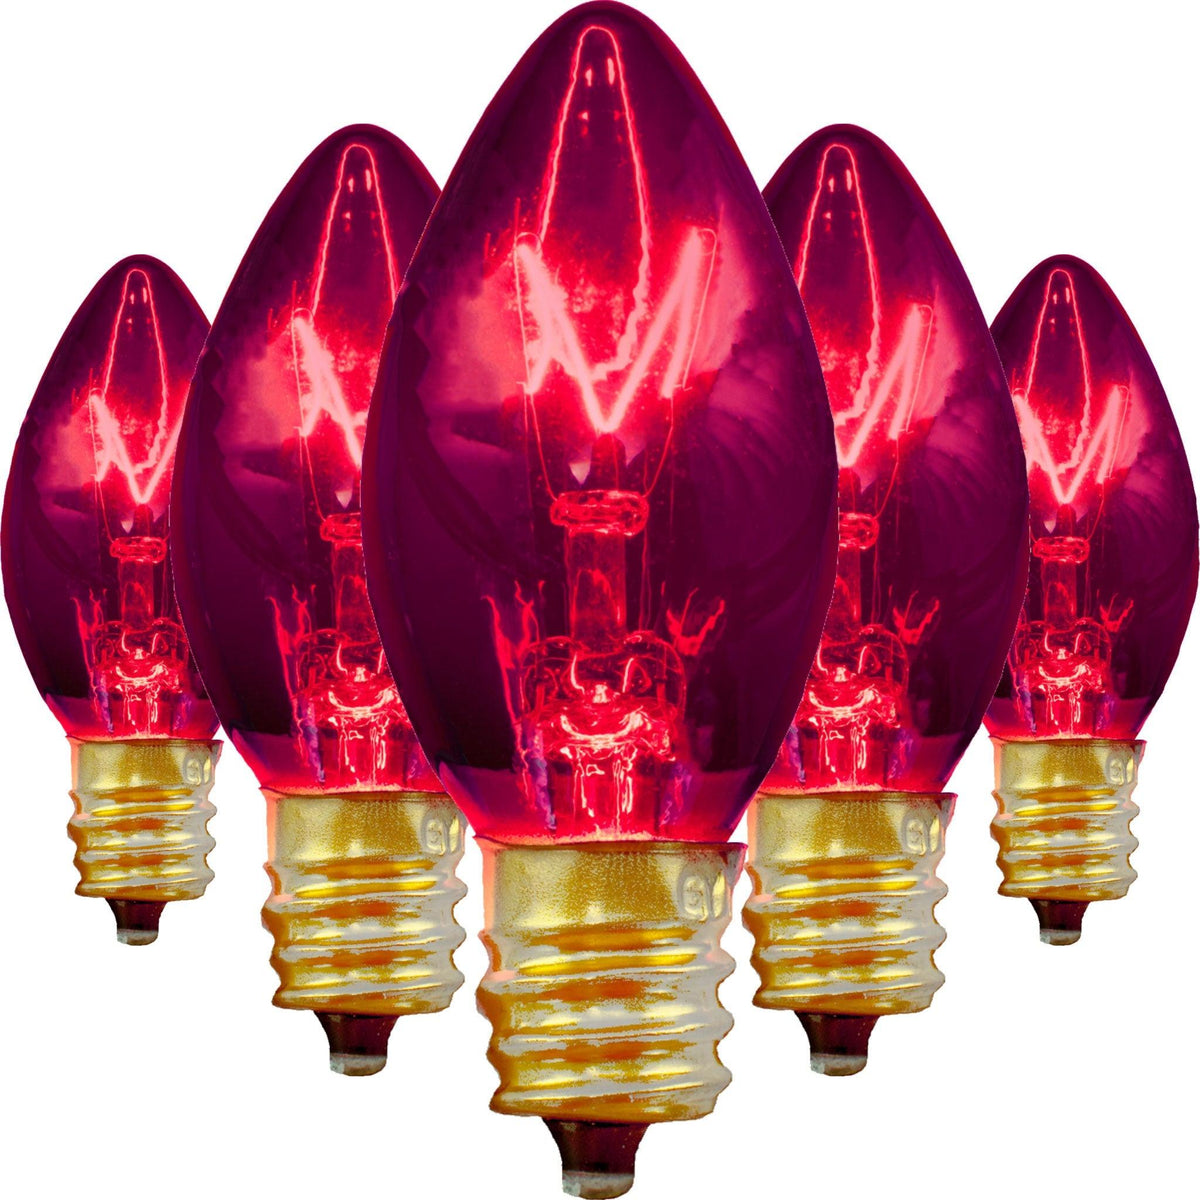 C-7 & C-9 Transparent Purple Candelabra Christmas Light Bulbs sold in a pack of 25 from leedisplay.com